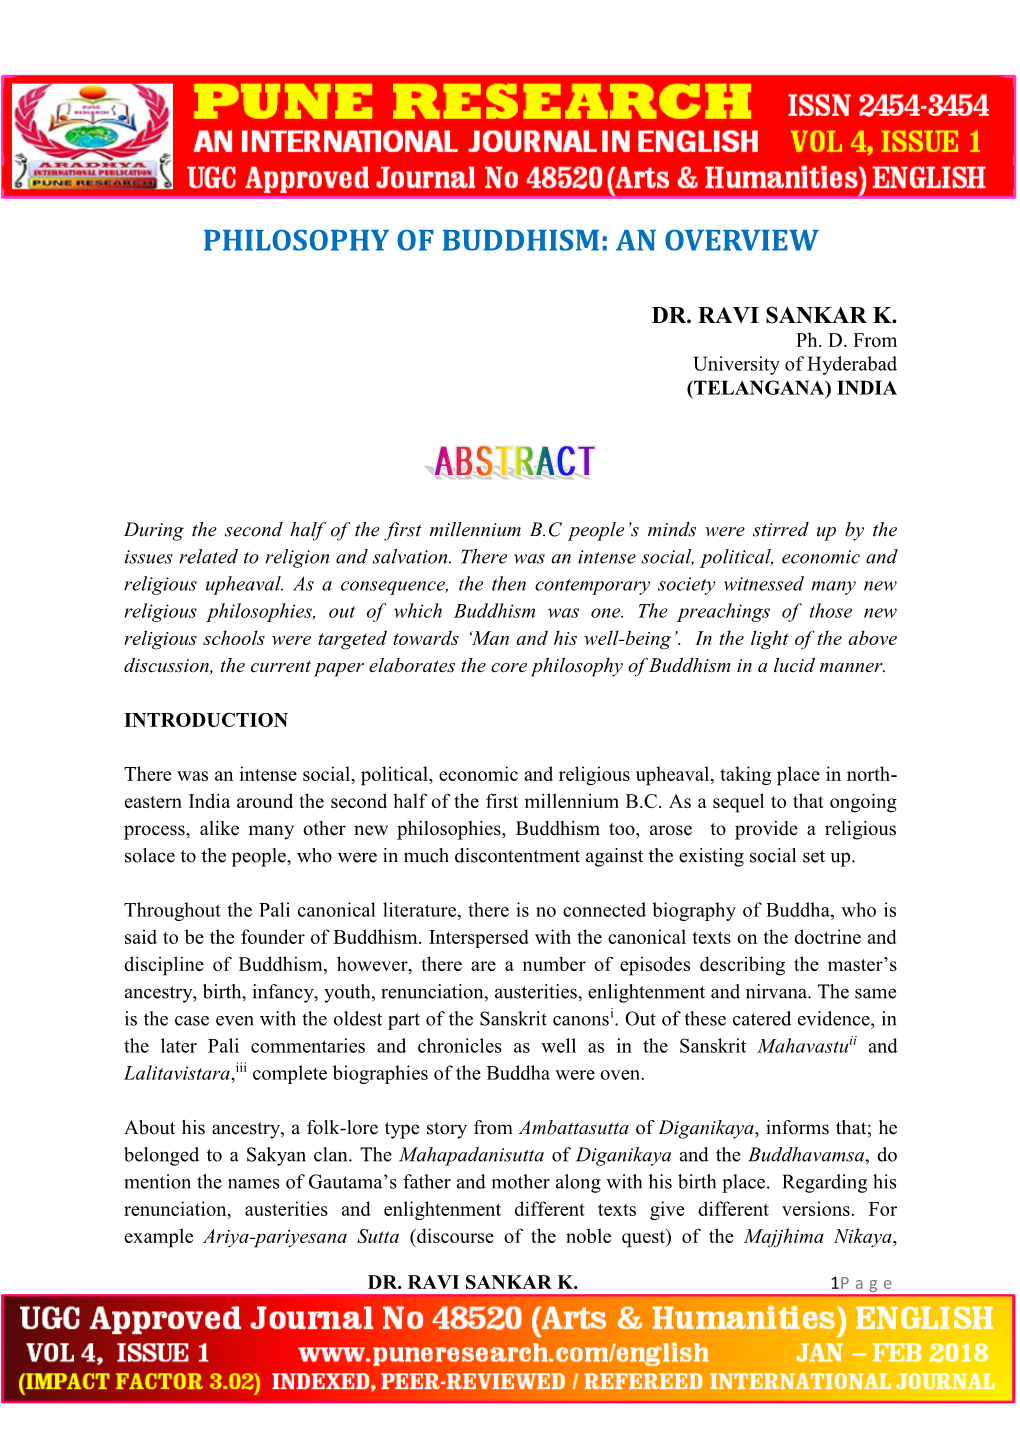 Philosophy of Buddhism: an Overview